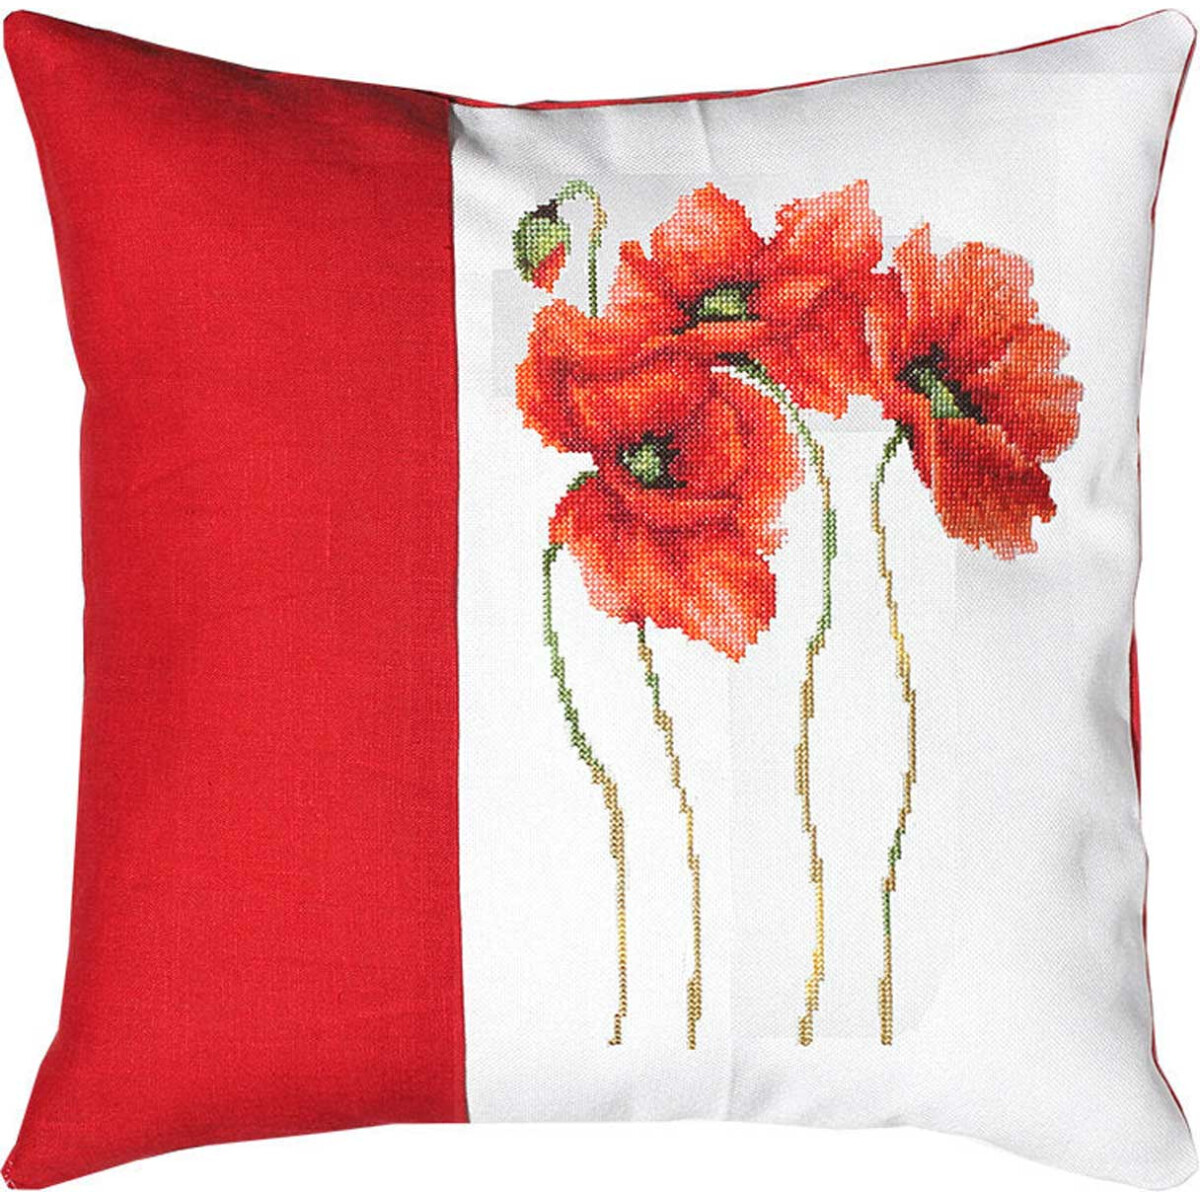 A square cushion with a design featuring bright red...